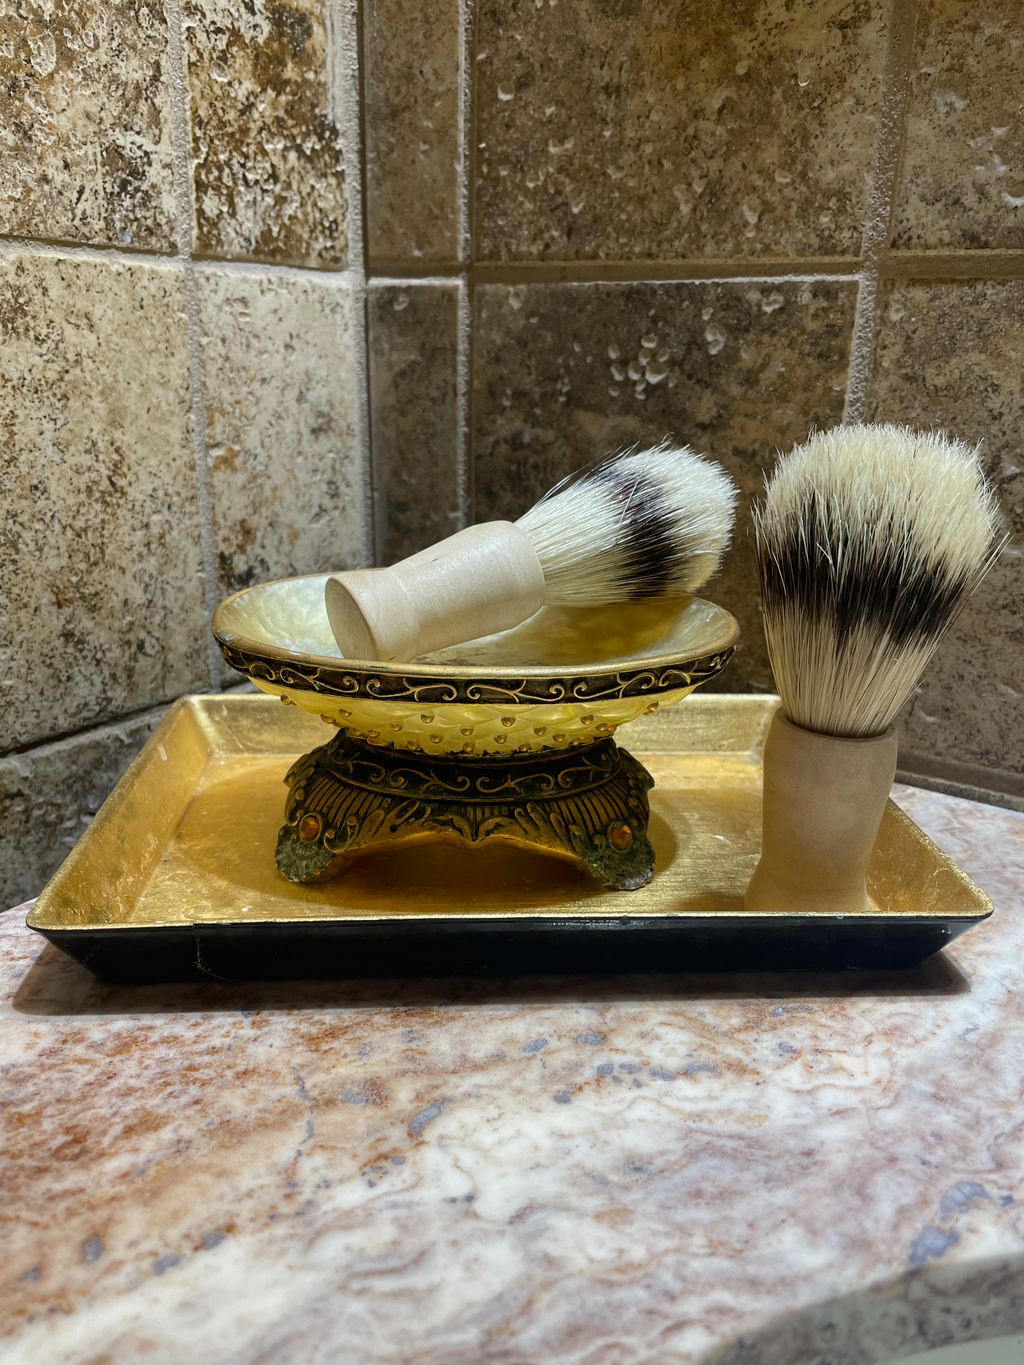 Gentleman's Shaving Brush ( Buy 1 take 1 or Buy 2 Take 2 free) ! Boar's Hair Bristles for a Close Shave #G226